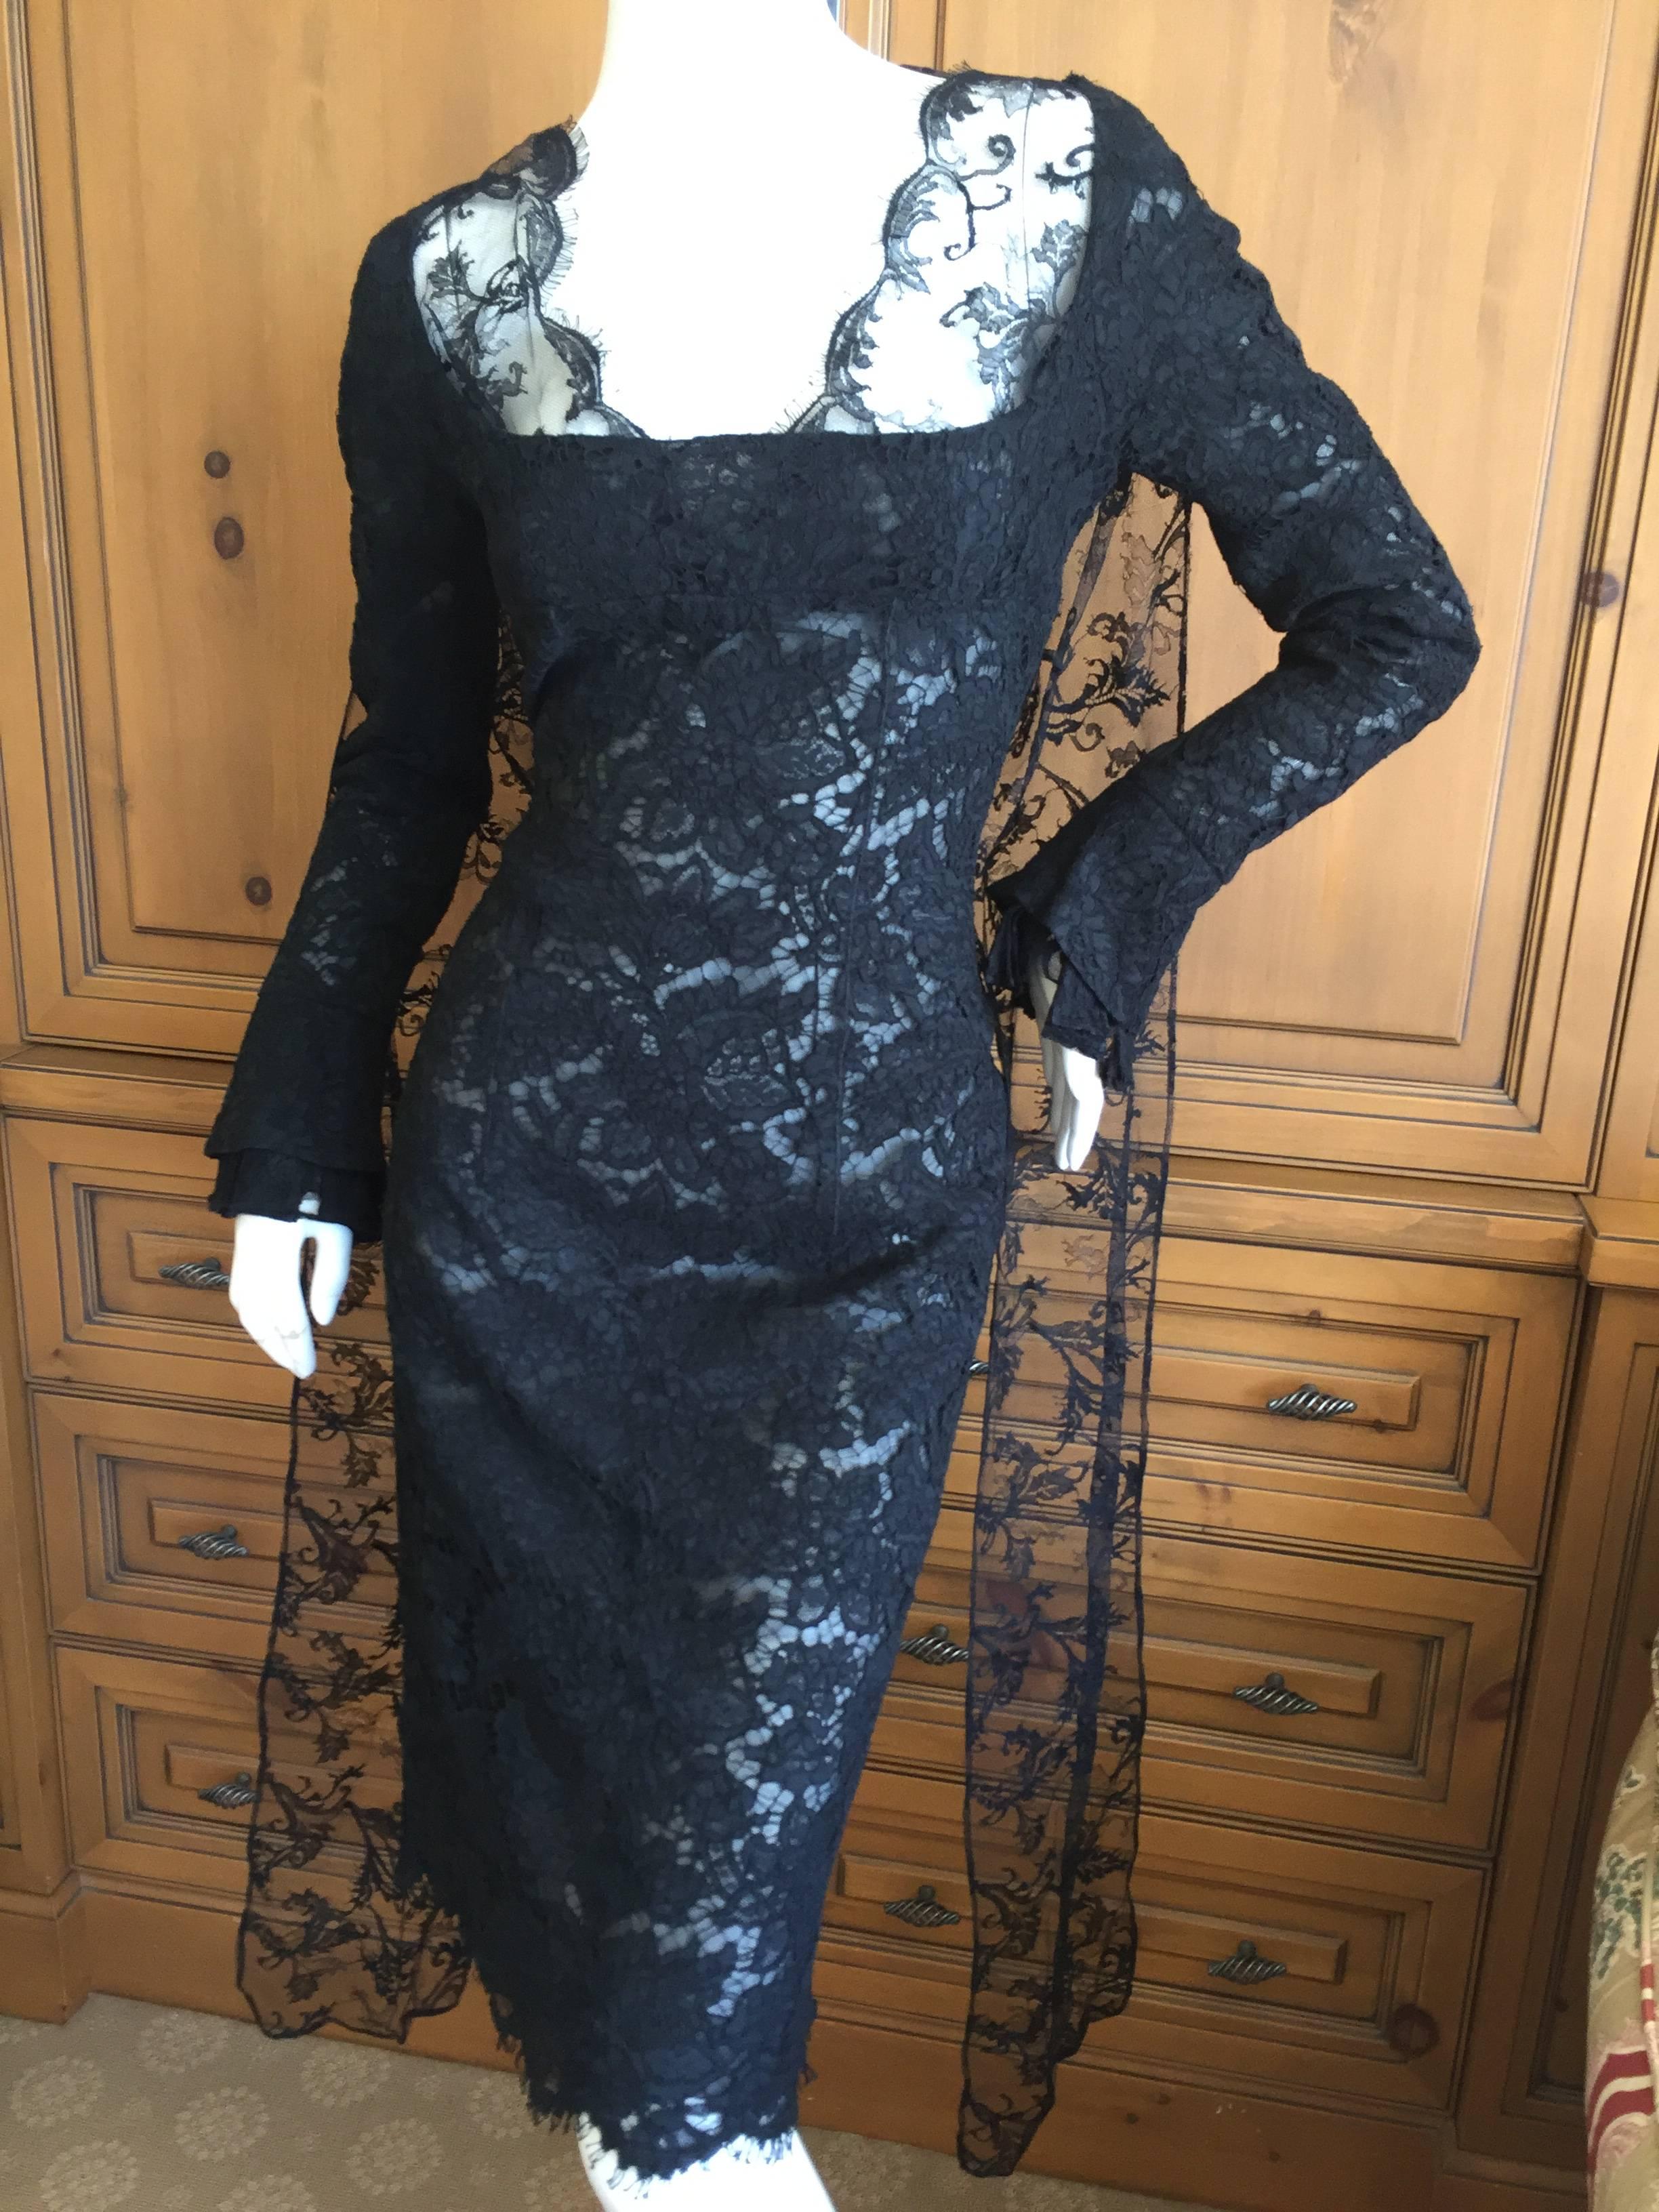 Yves Saint Laurent by Tom Ford Black Lace Cocktail Dress with Scarf Ties In Excellent Condition For Sale In Cloverdale, CA